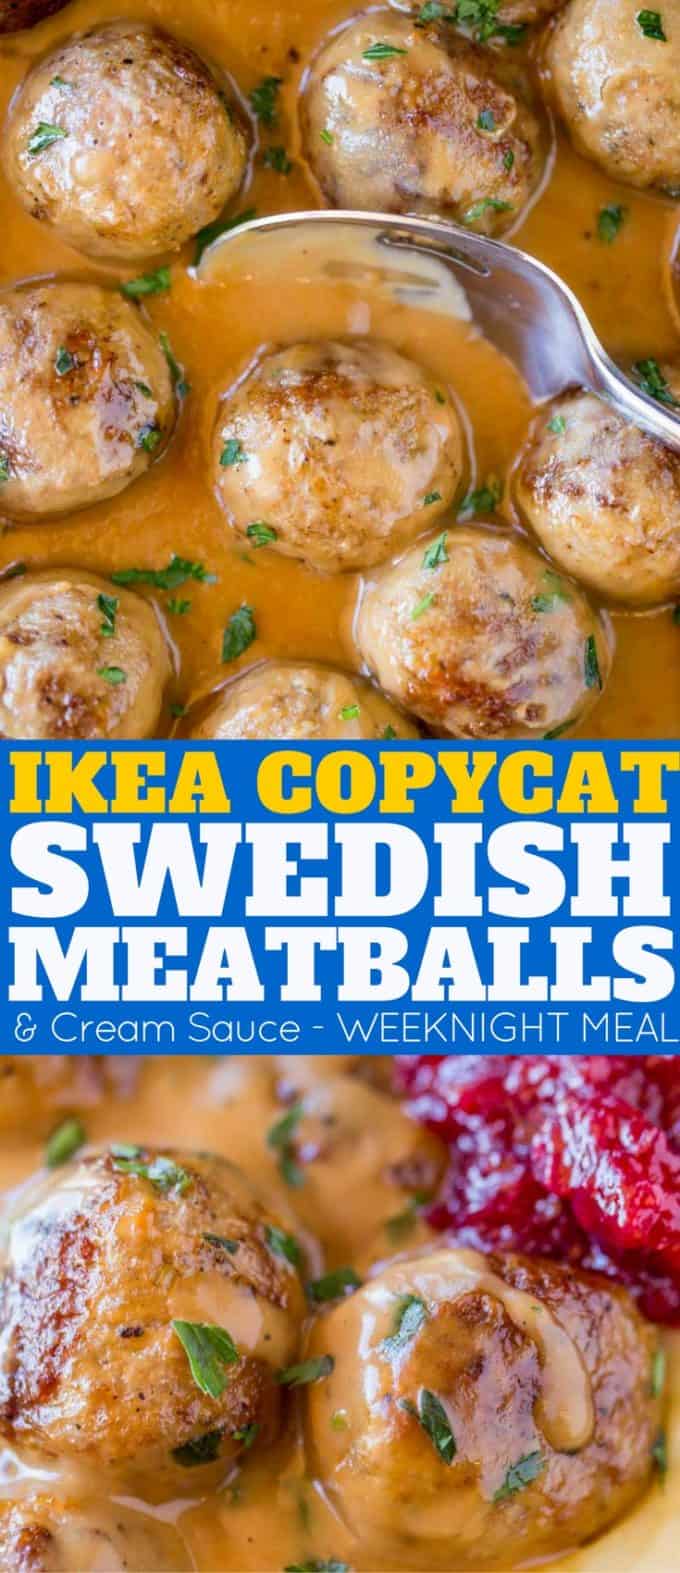 We love these Swedish Meatballs as much as the Ikea Meatballs they're a copycat of!